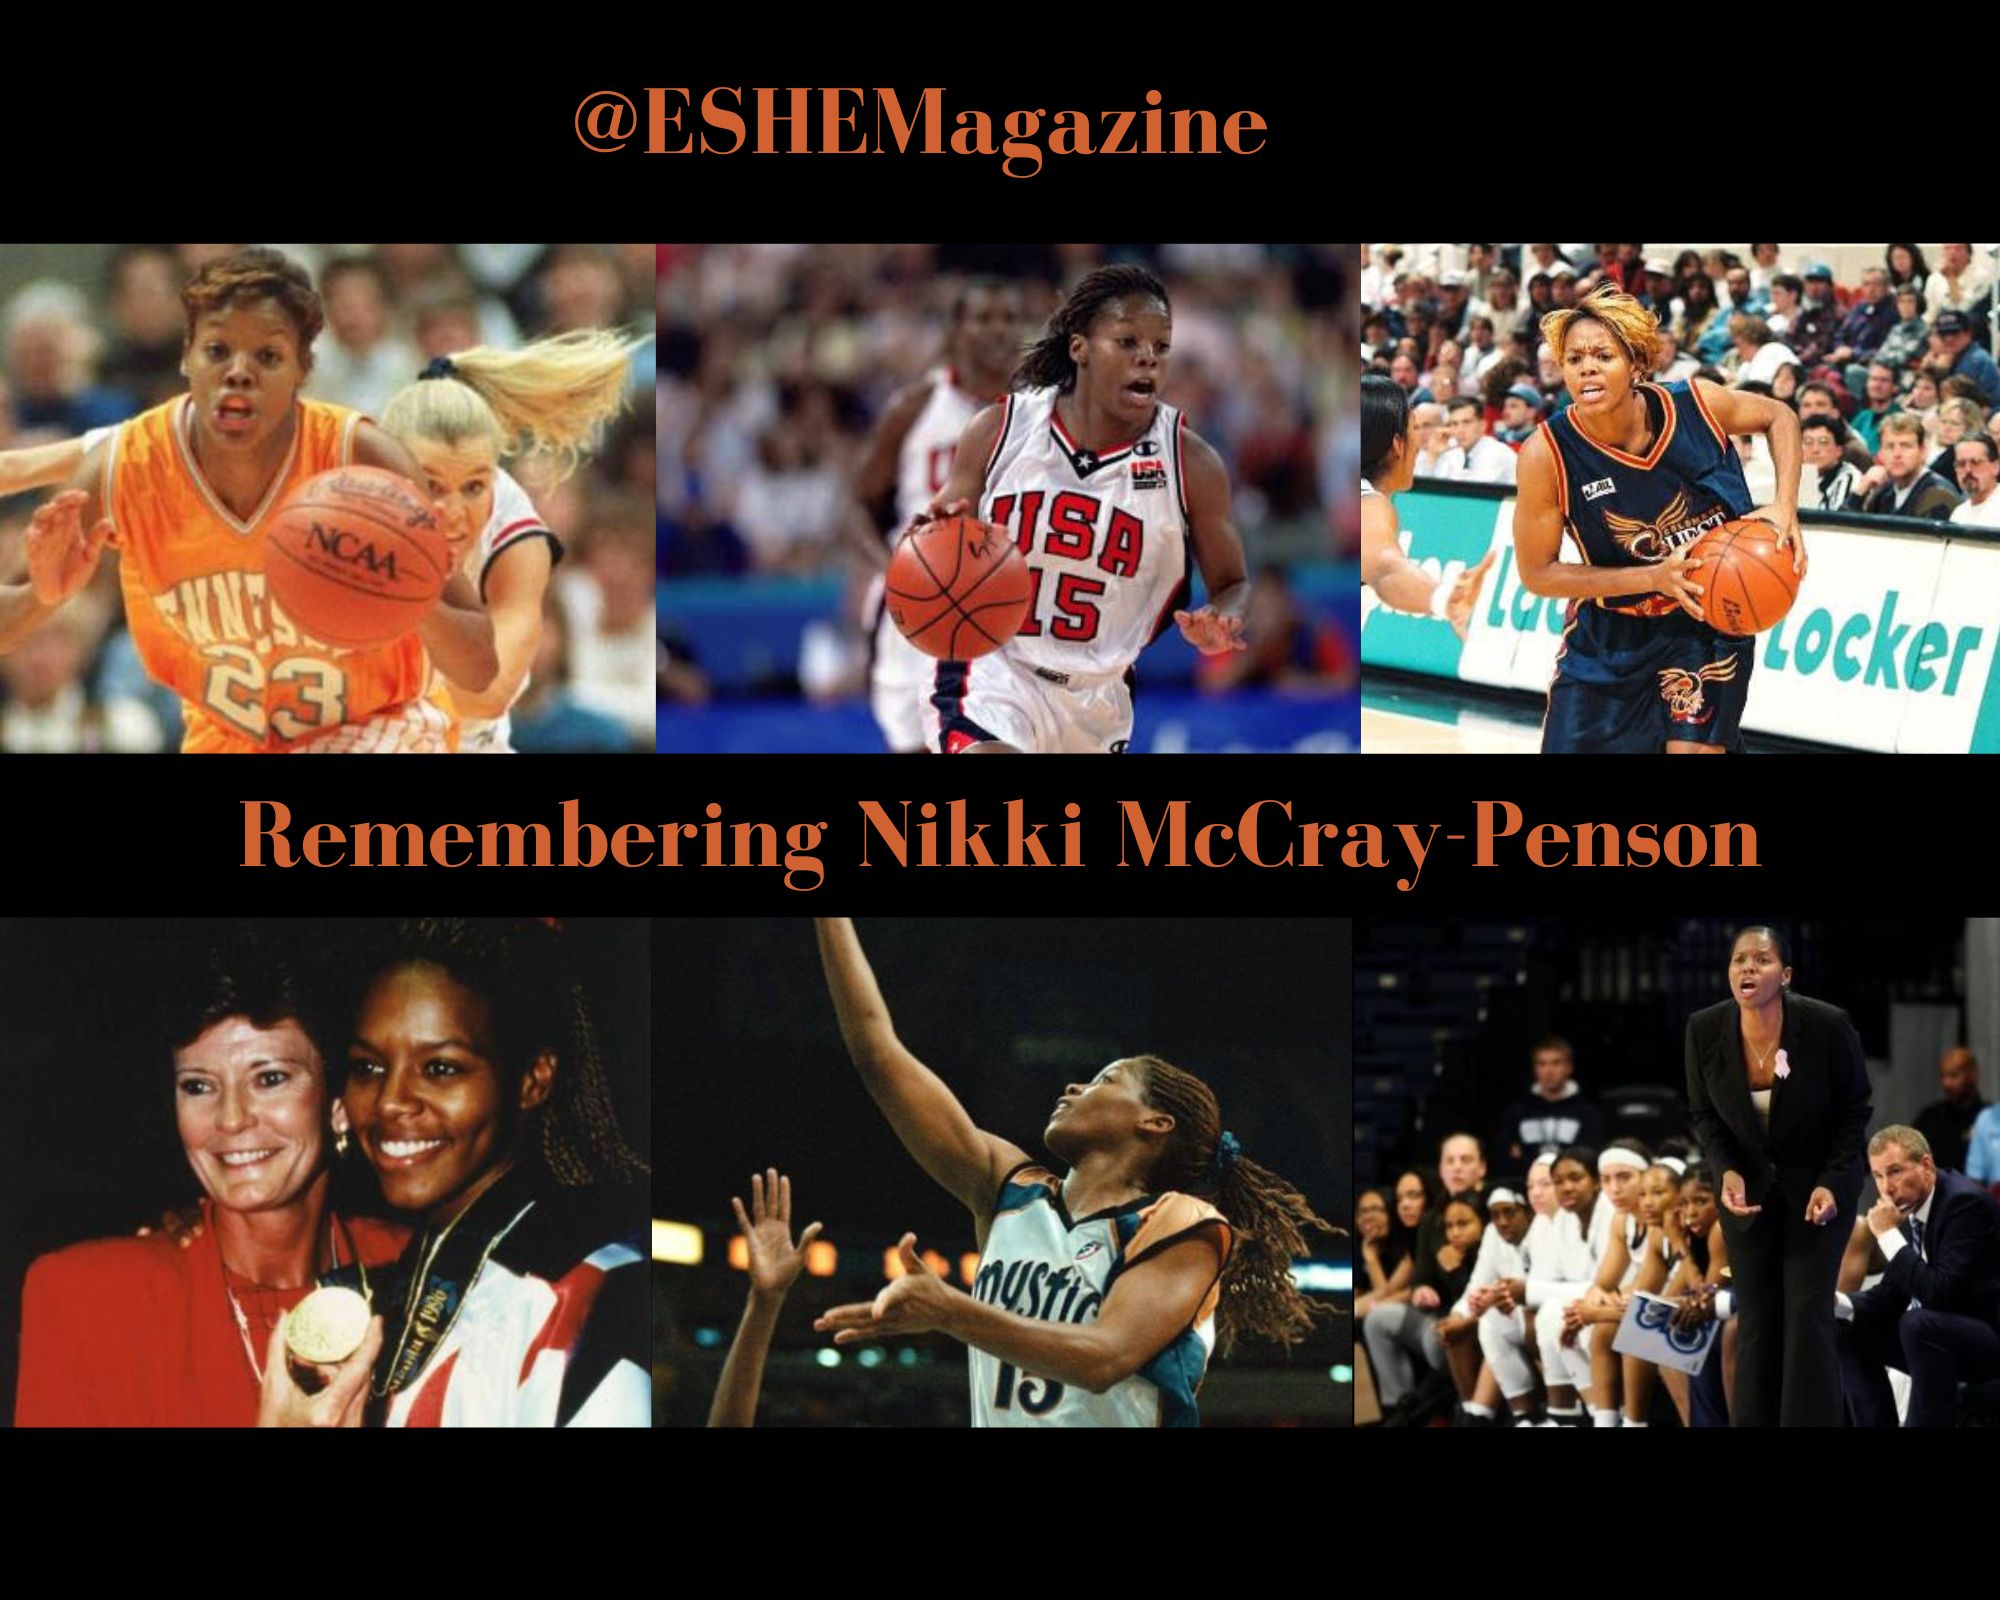 Remembering Nikki McCray-Penson And Her Impact On Women’s Basketball